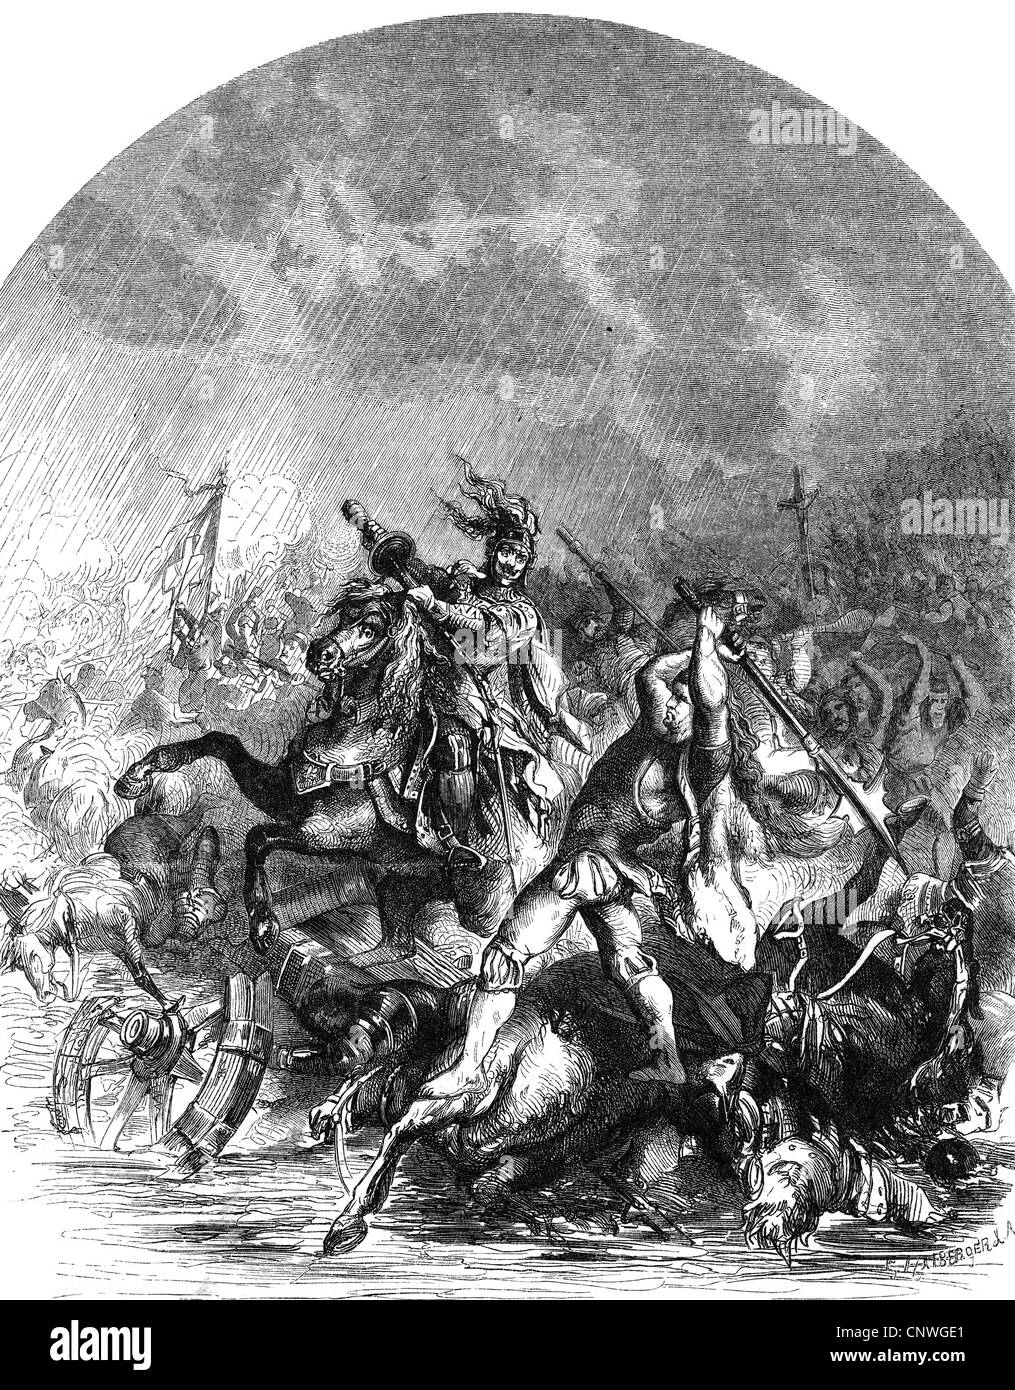 literature, fairy tales and legends, Reimer von Wiemerstedt kills the landsknecht leader Thomas Slentz (Schleinitz) in the Battle of Hemmingstedt, wood engraving, illustration from a book by Wilhelm Zimmermann, 19th century, Wulf Isebrand, legend, fight, fighting, Germany, 16th century, historic, historical, people, Additional-Rights-Clearences-Not Available Stock Photo